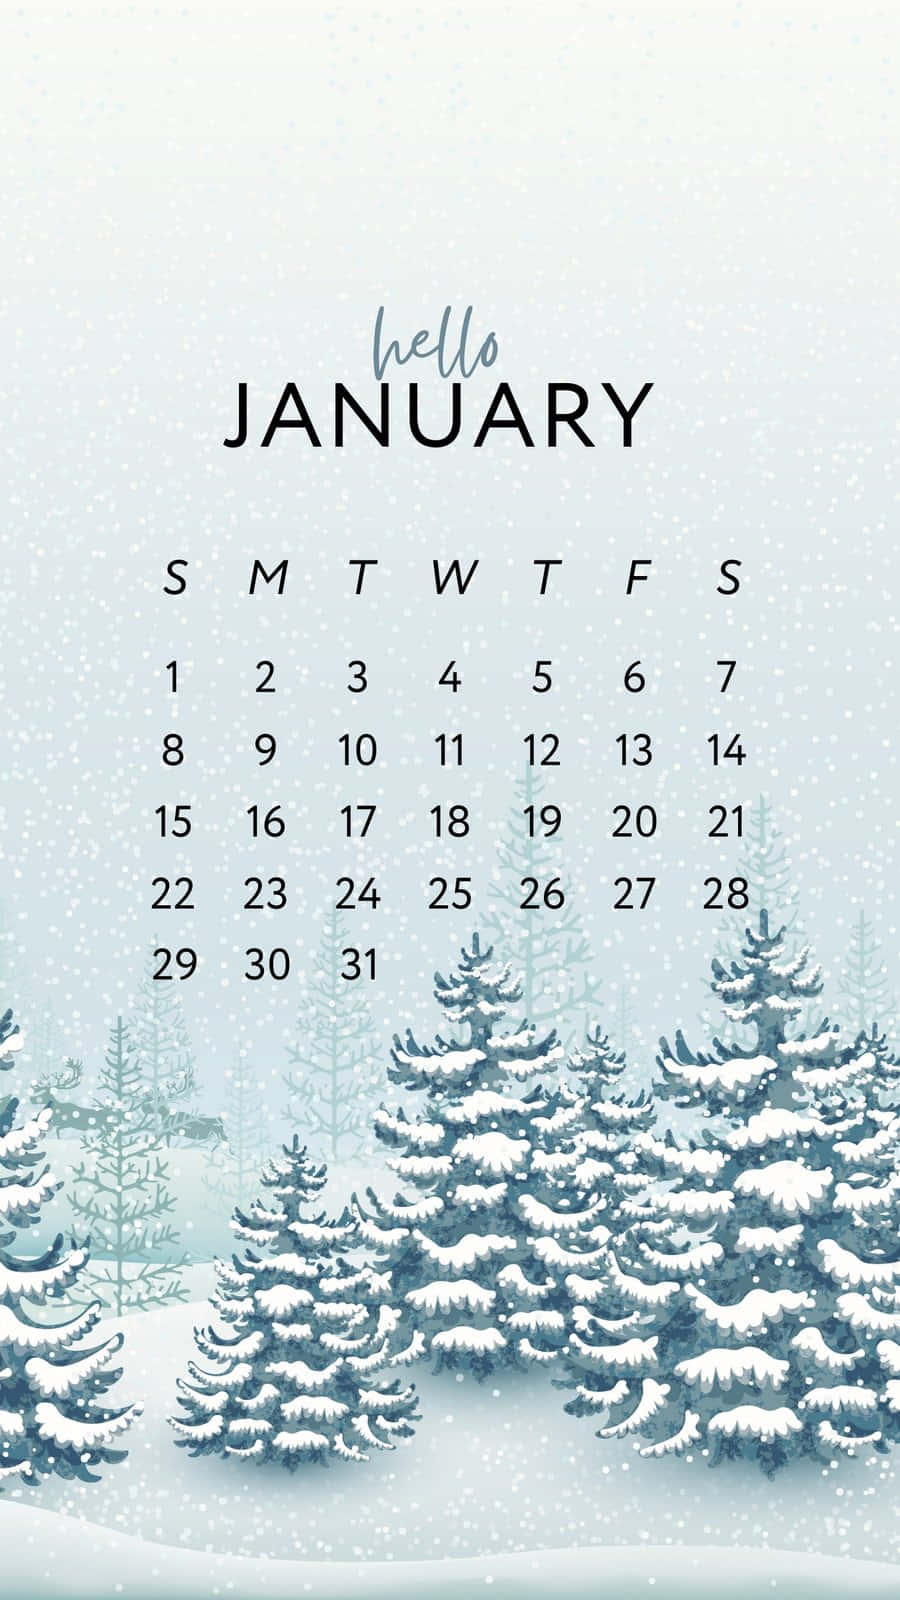 Greeting the New Year with Open Arms | Hello January Wallpaper